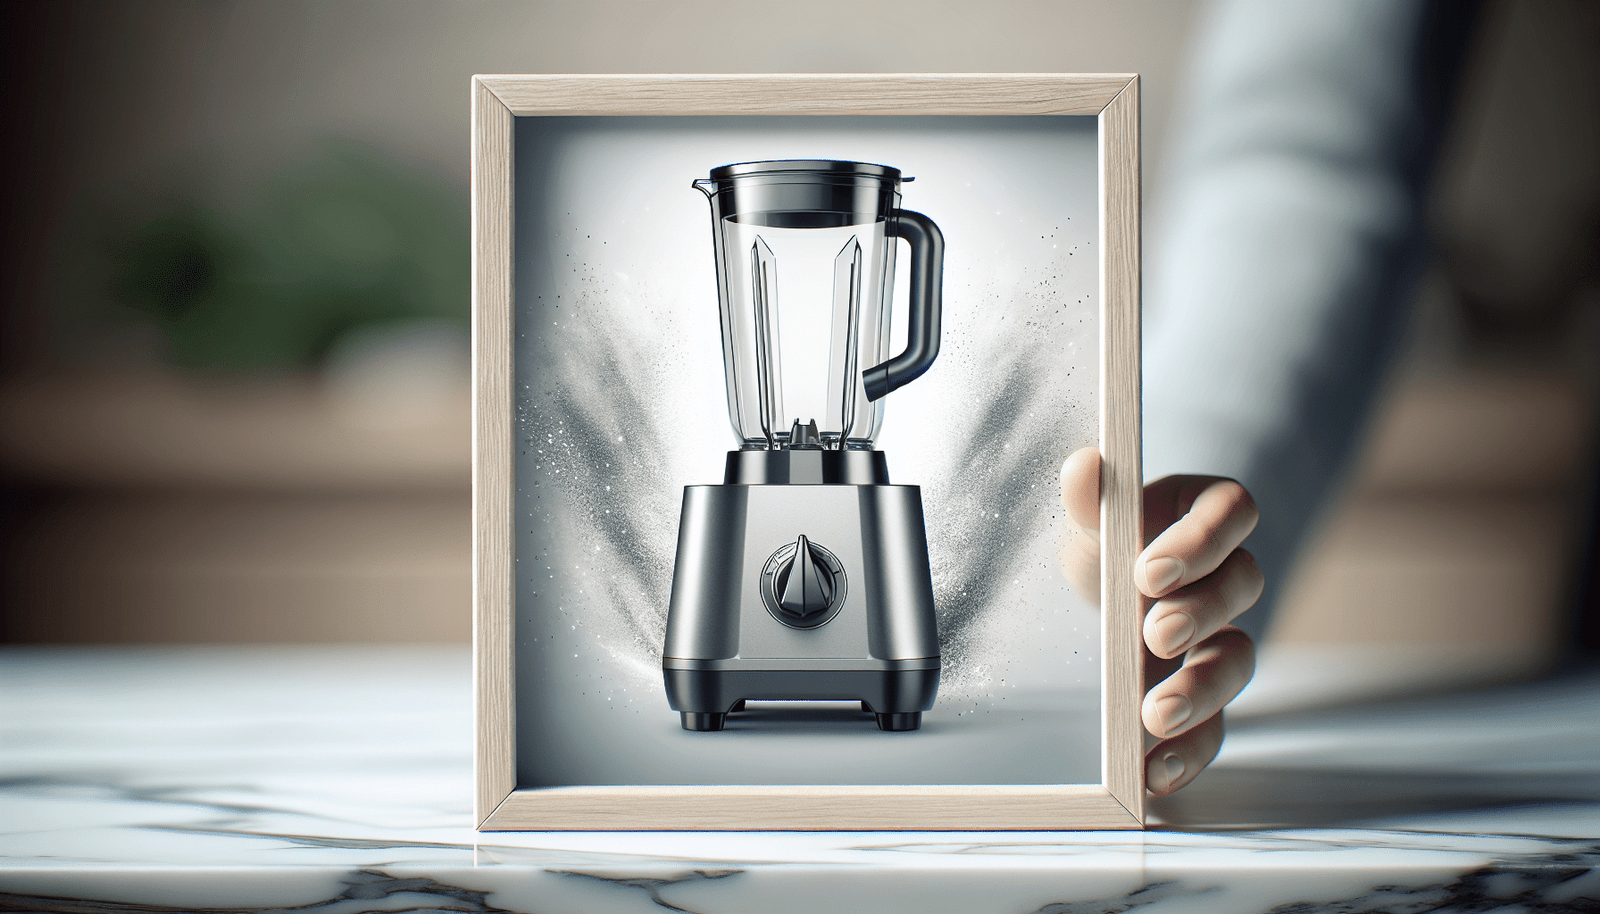 Affordable To Premium: The Price Range Of Portable Blenders